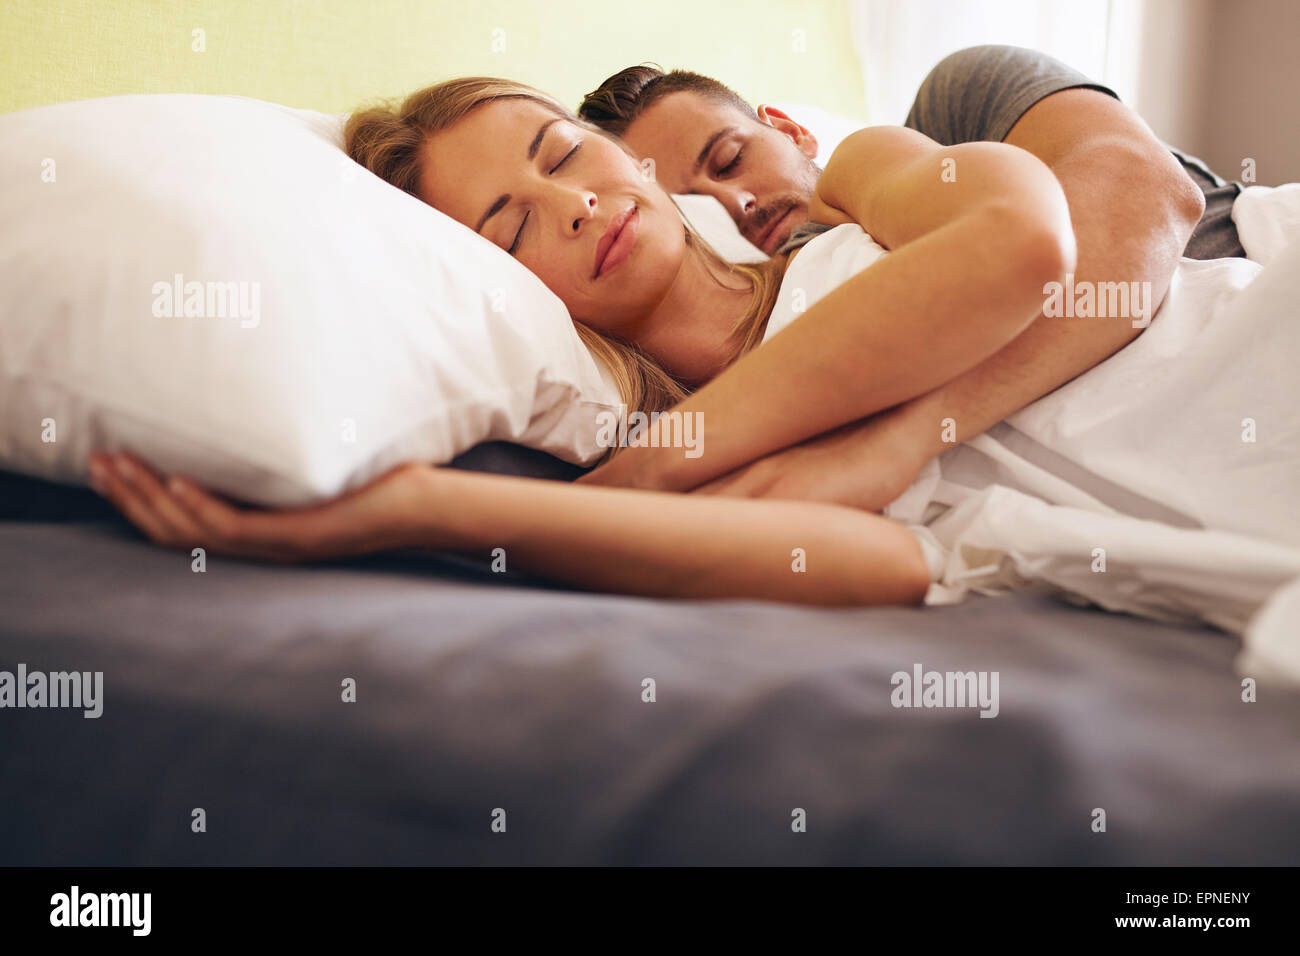 Image of a young couple together sleeping comfortably on the bed. Young man and woman lying asleep. Stock Photo